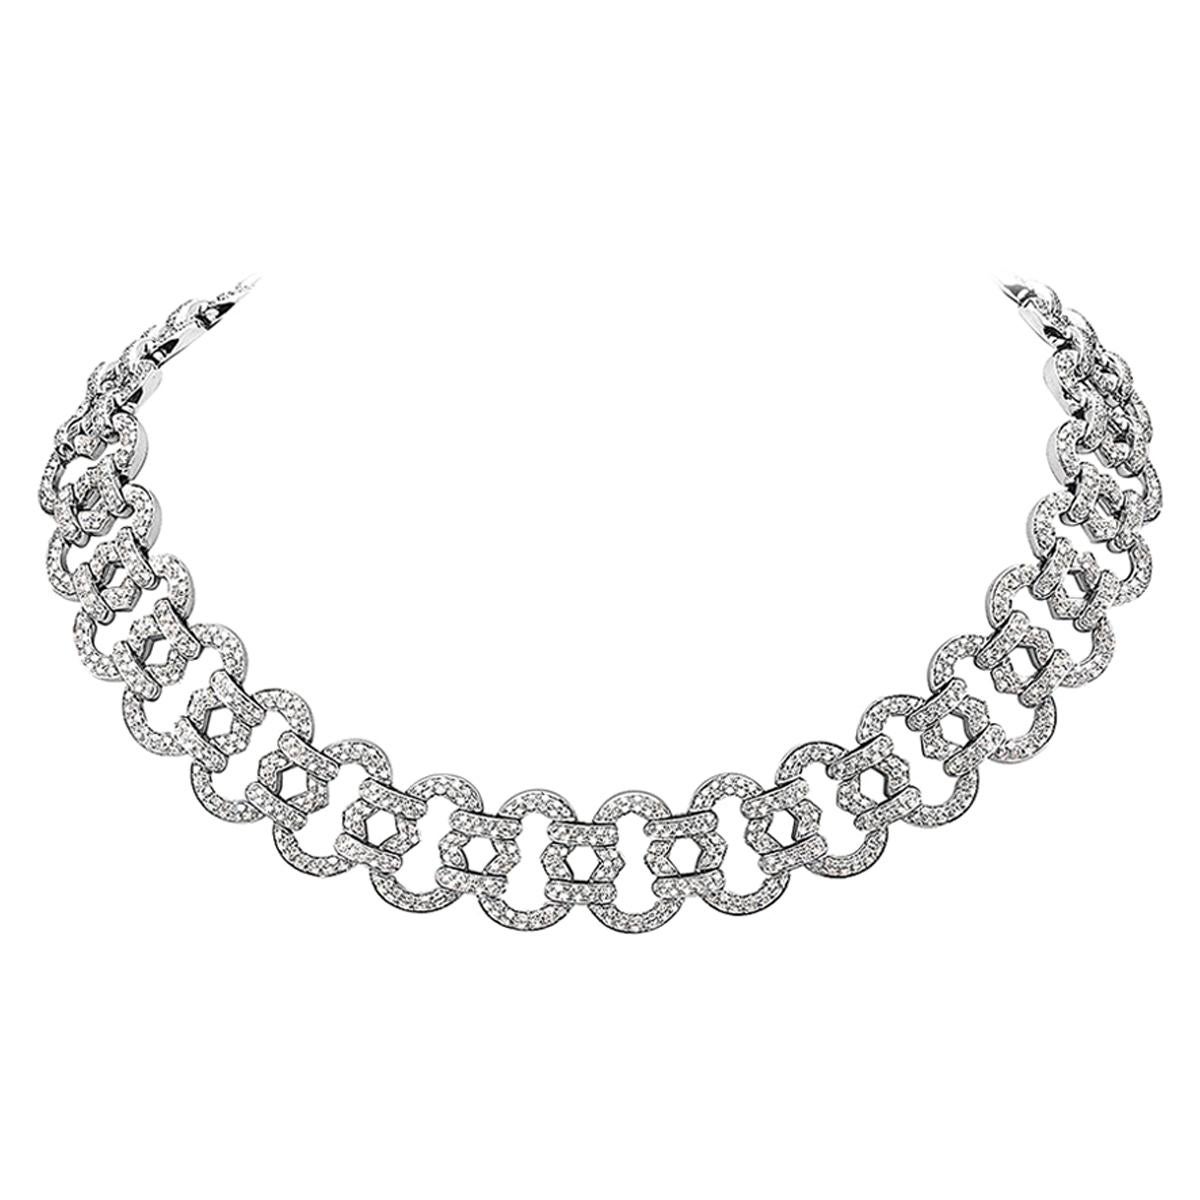 11.32 Carat Diamond and 18 Karat White Gold Chain Collar Necklace For Sale